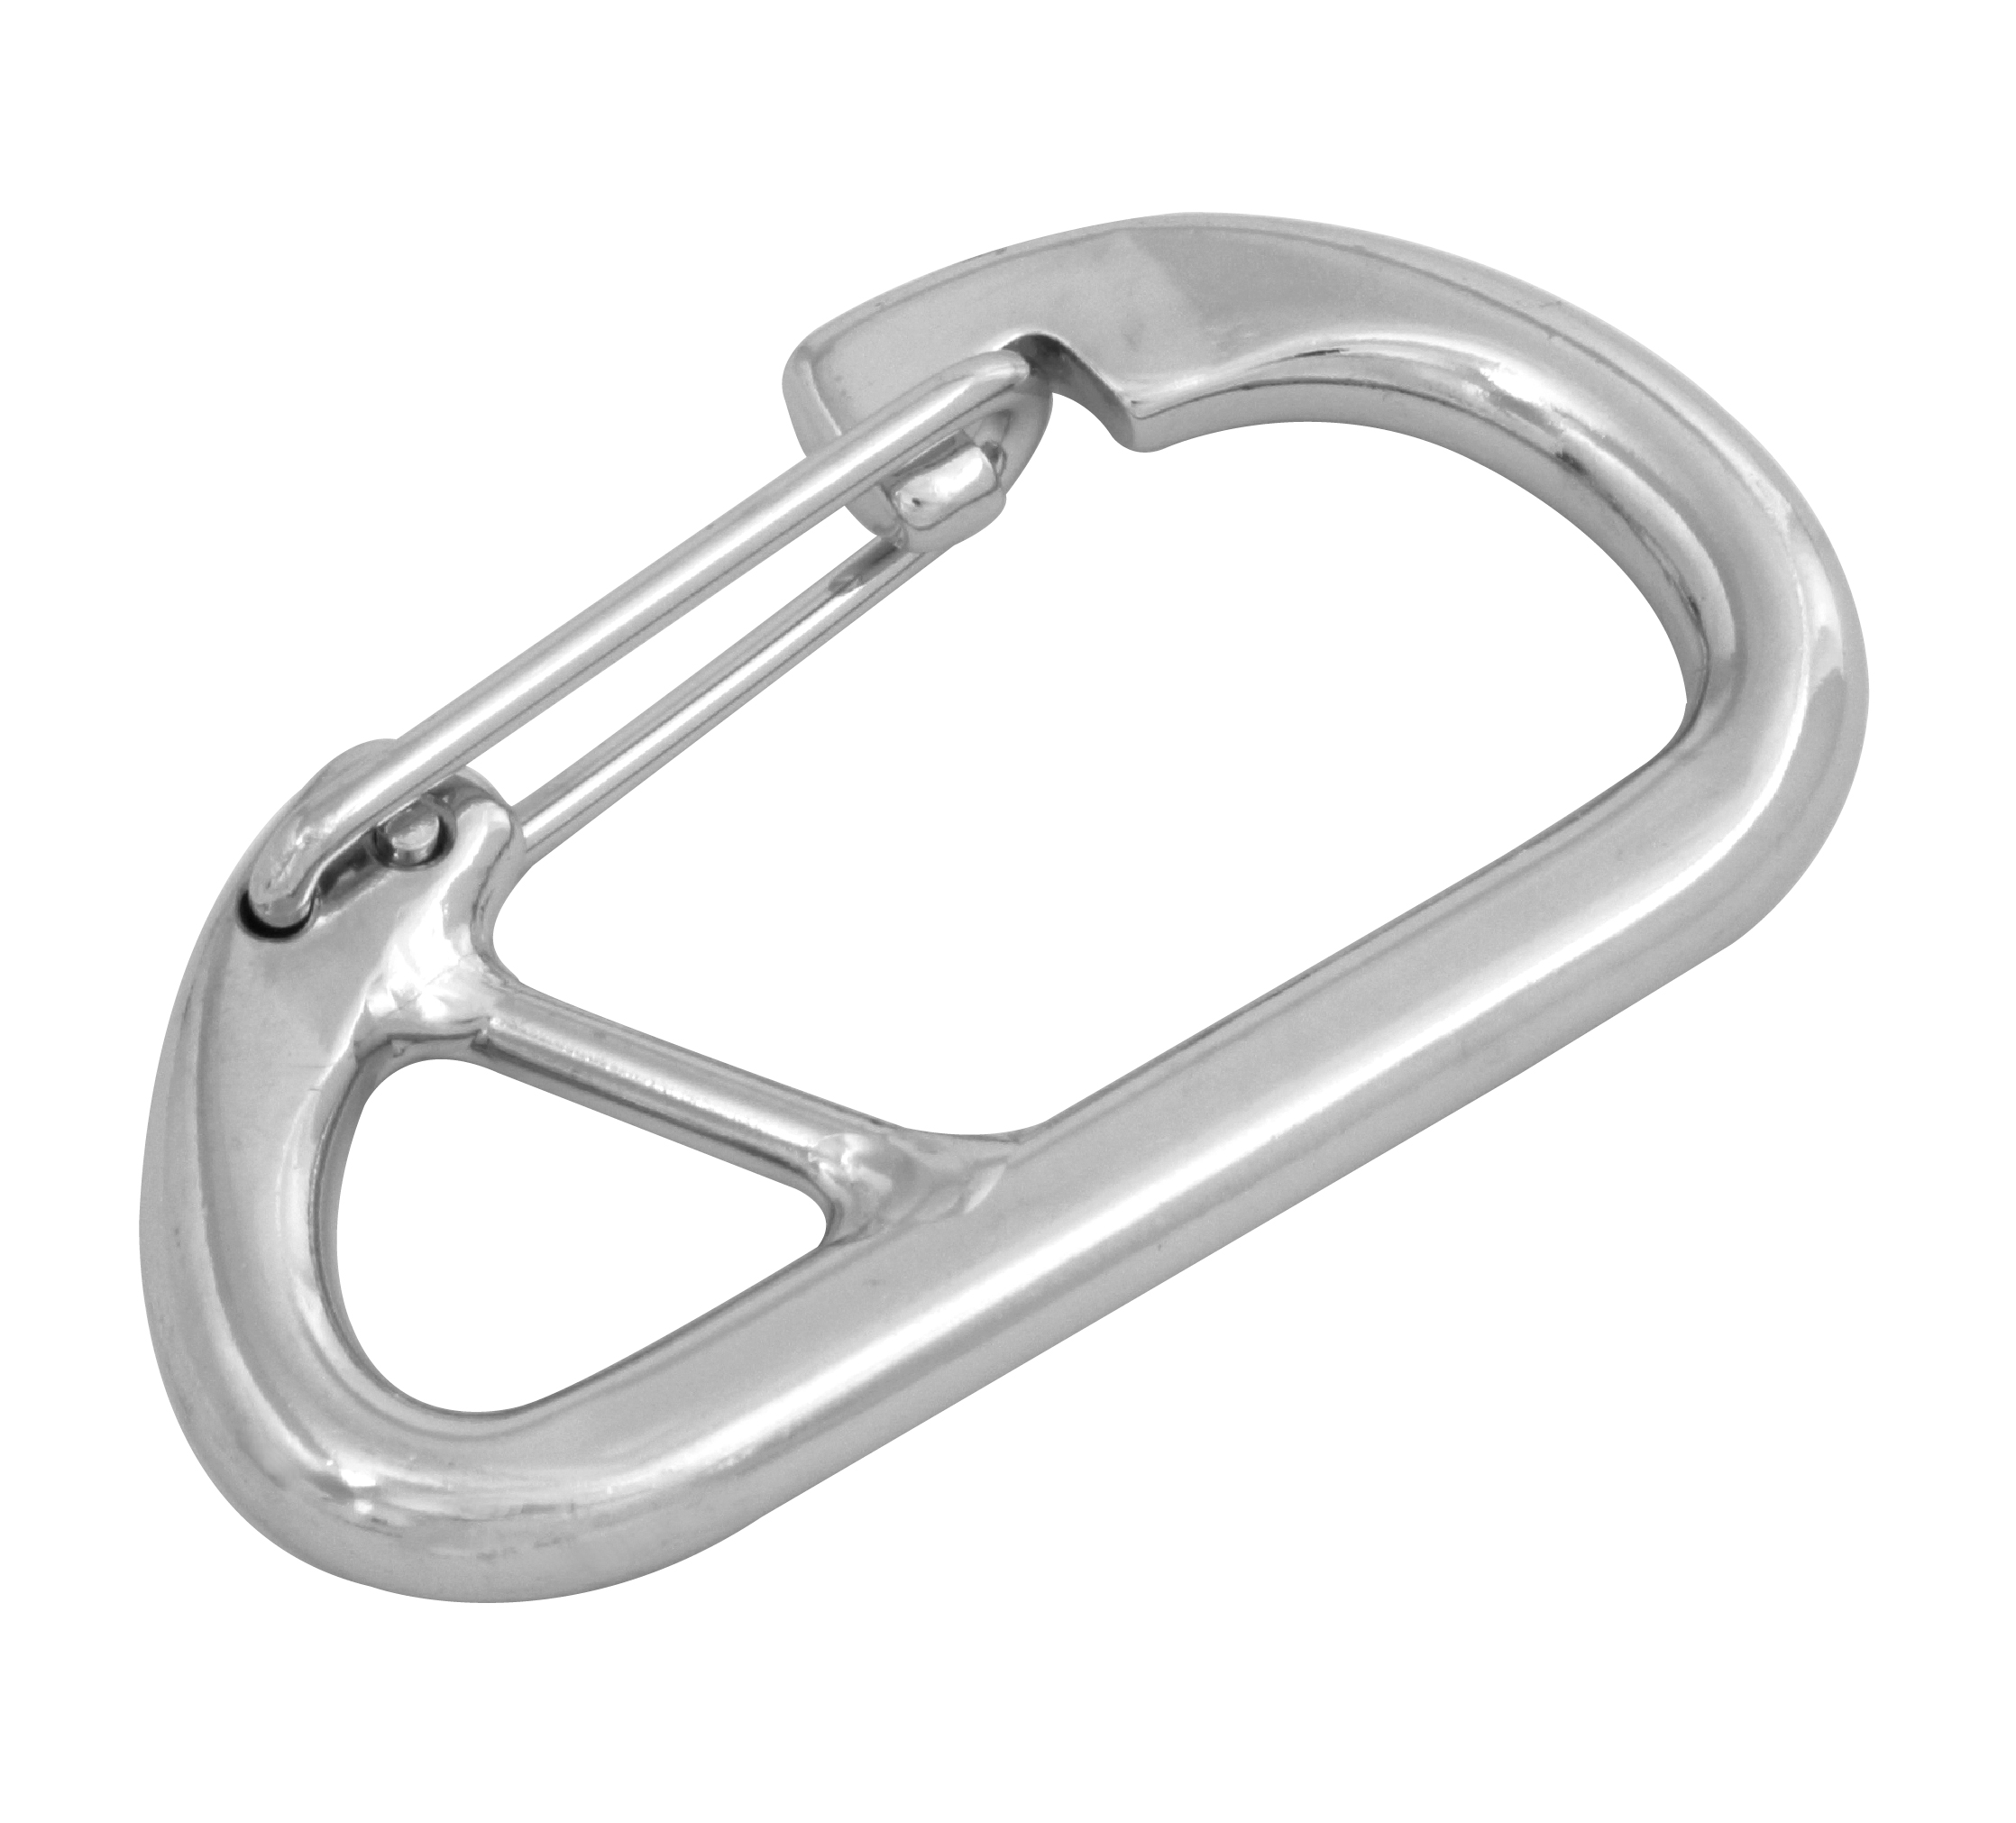 Spring snaps-type2 (cicular hook with welded bar end)